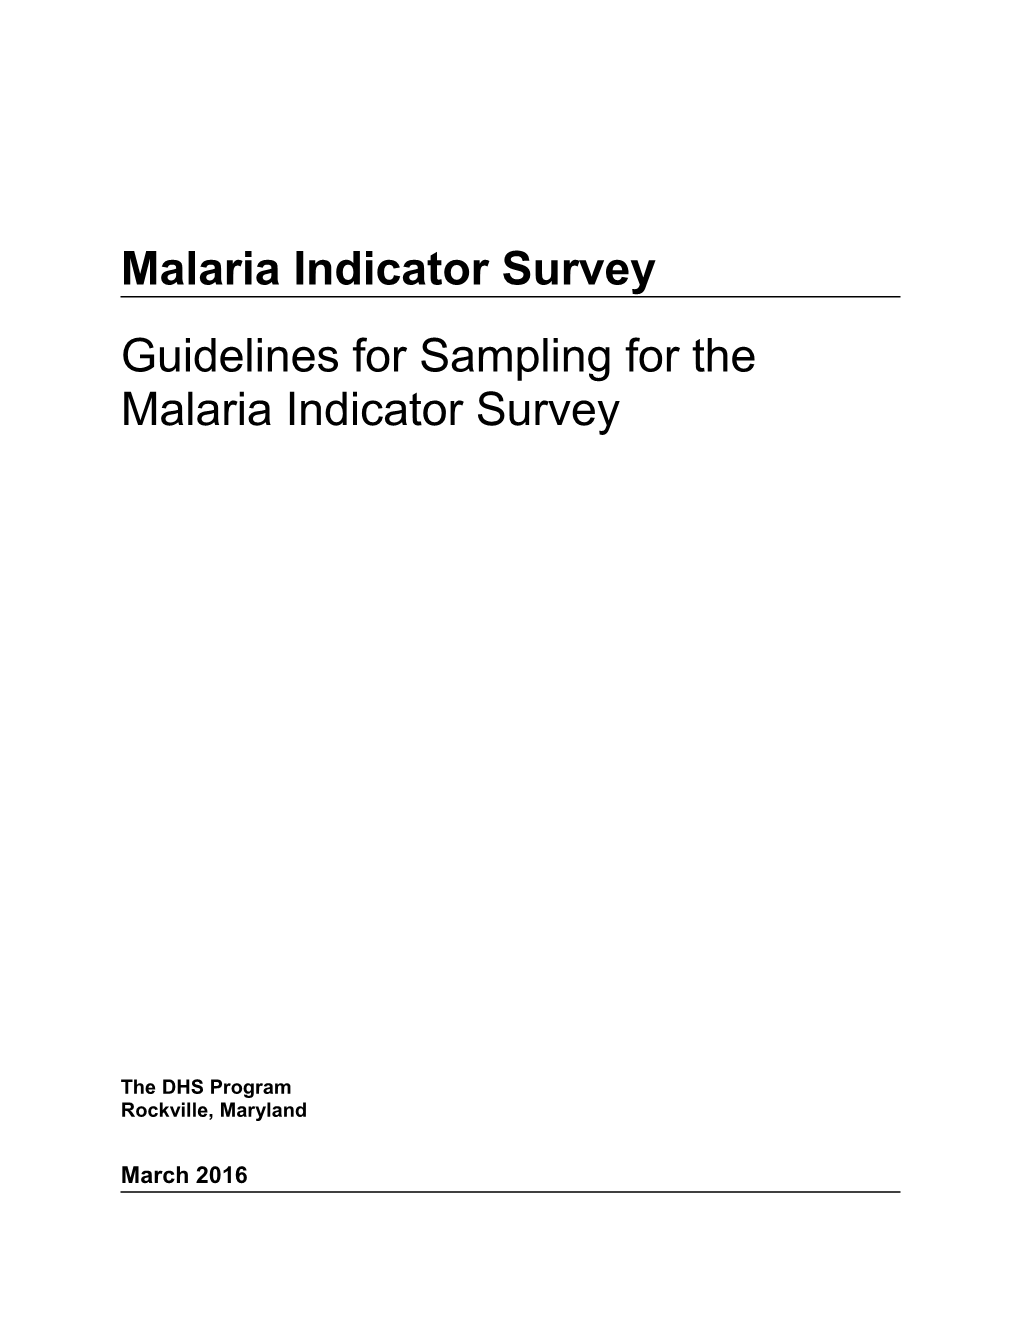 Guidelines for Sampling for the Malaria Indicator Survey